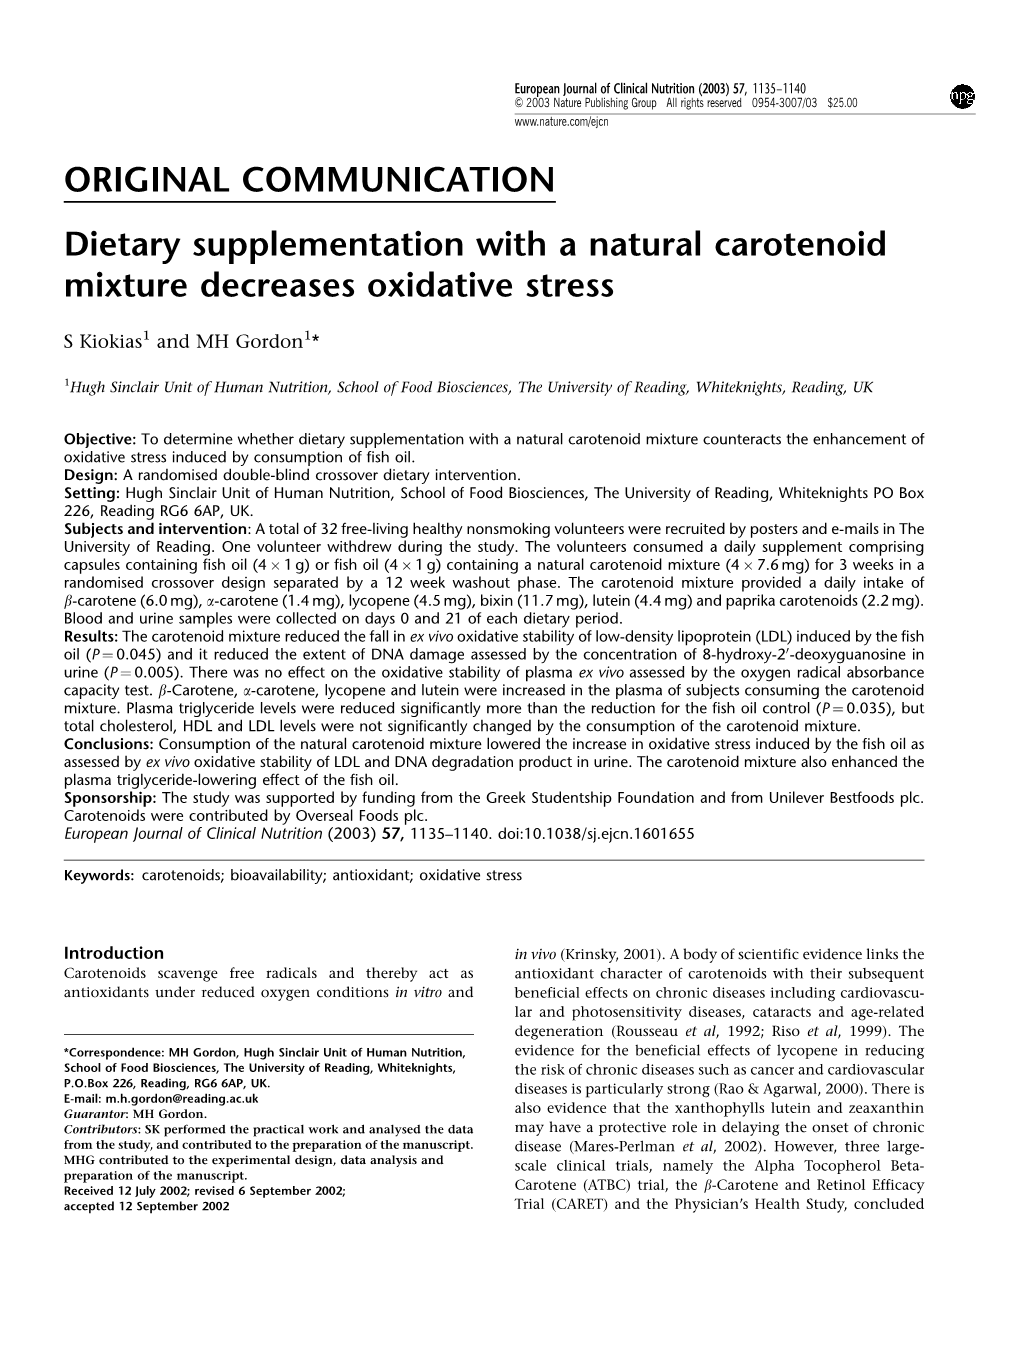 Dietary Supplementation with a Natural Carotenoid Mixture Decreases Oxidative Stress